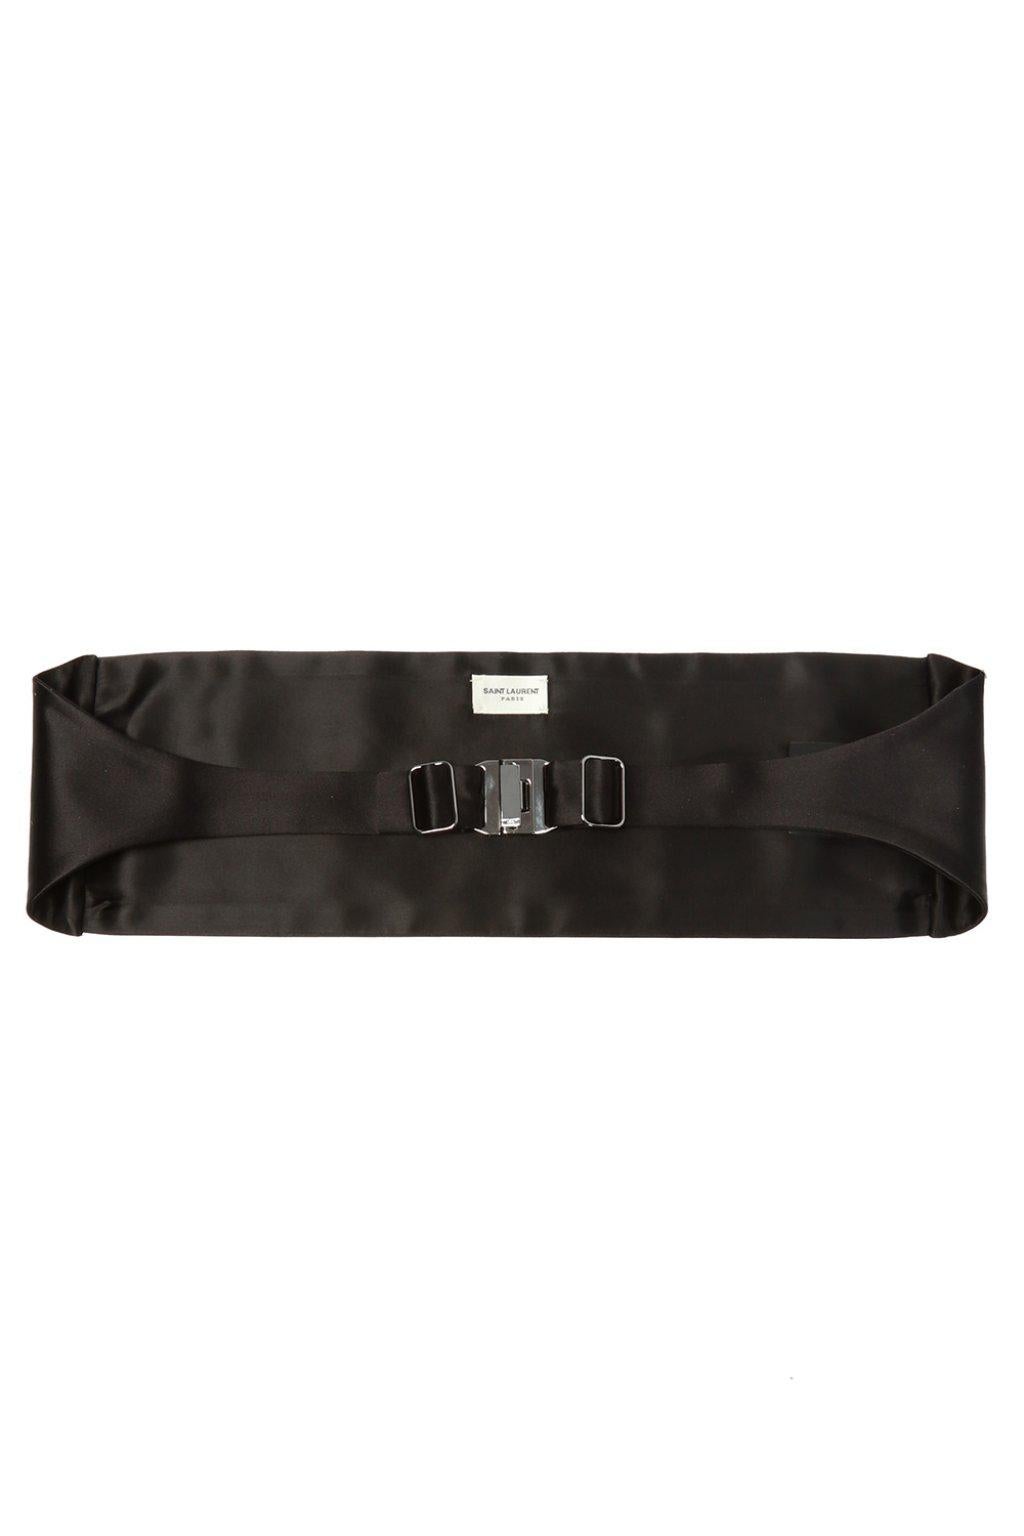 Saint Laurent Black Classic Tuxedo Silk Satin Pleated Cummerbund Belt

When you're looking for that finishing touch to your formalwear, accept nothing less than Saint Laurent. Opt for this black silk smoking cummerbund for an elite finish. Featuring